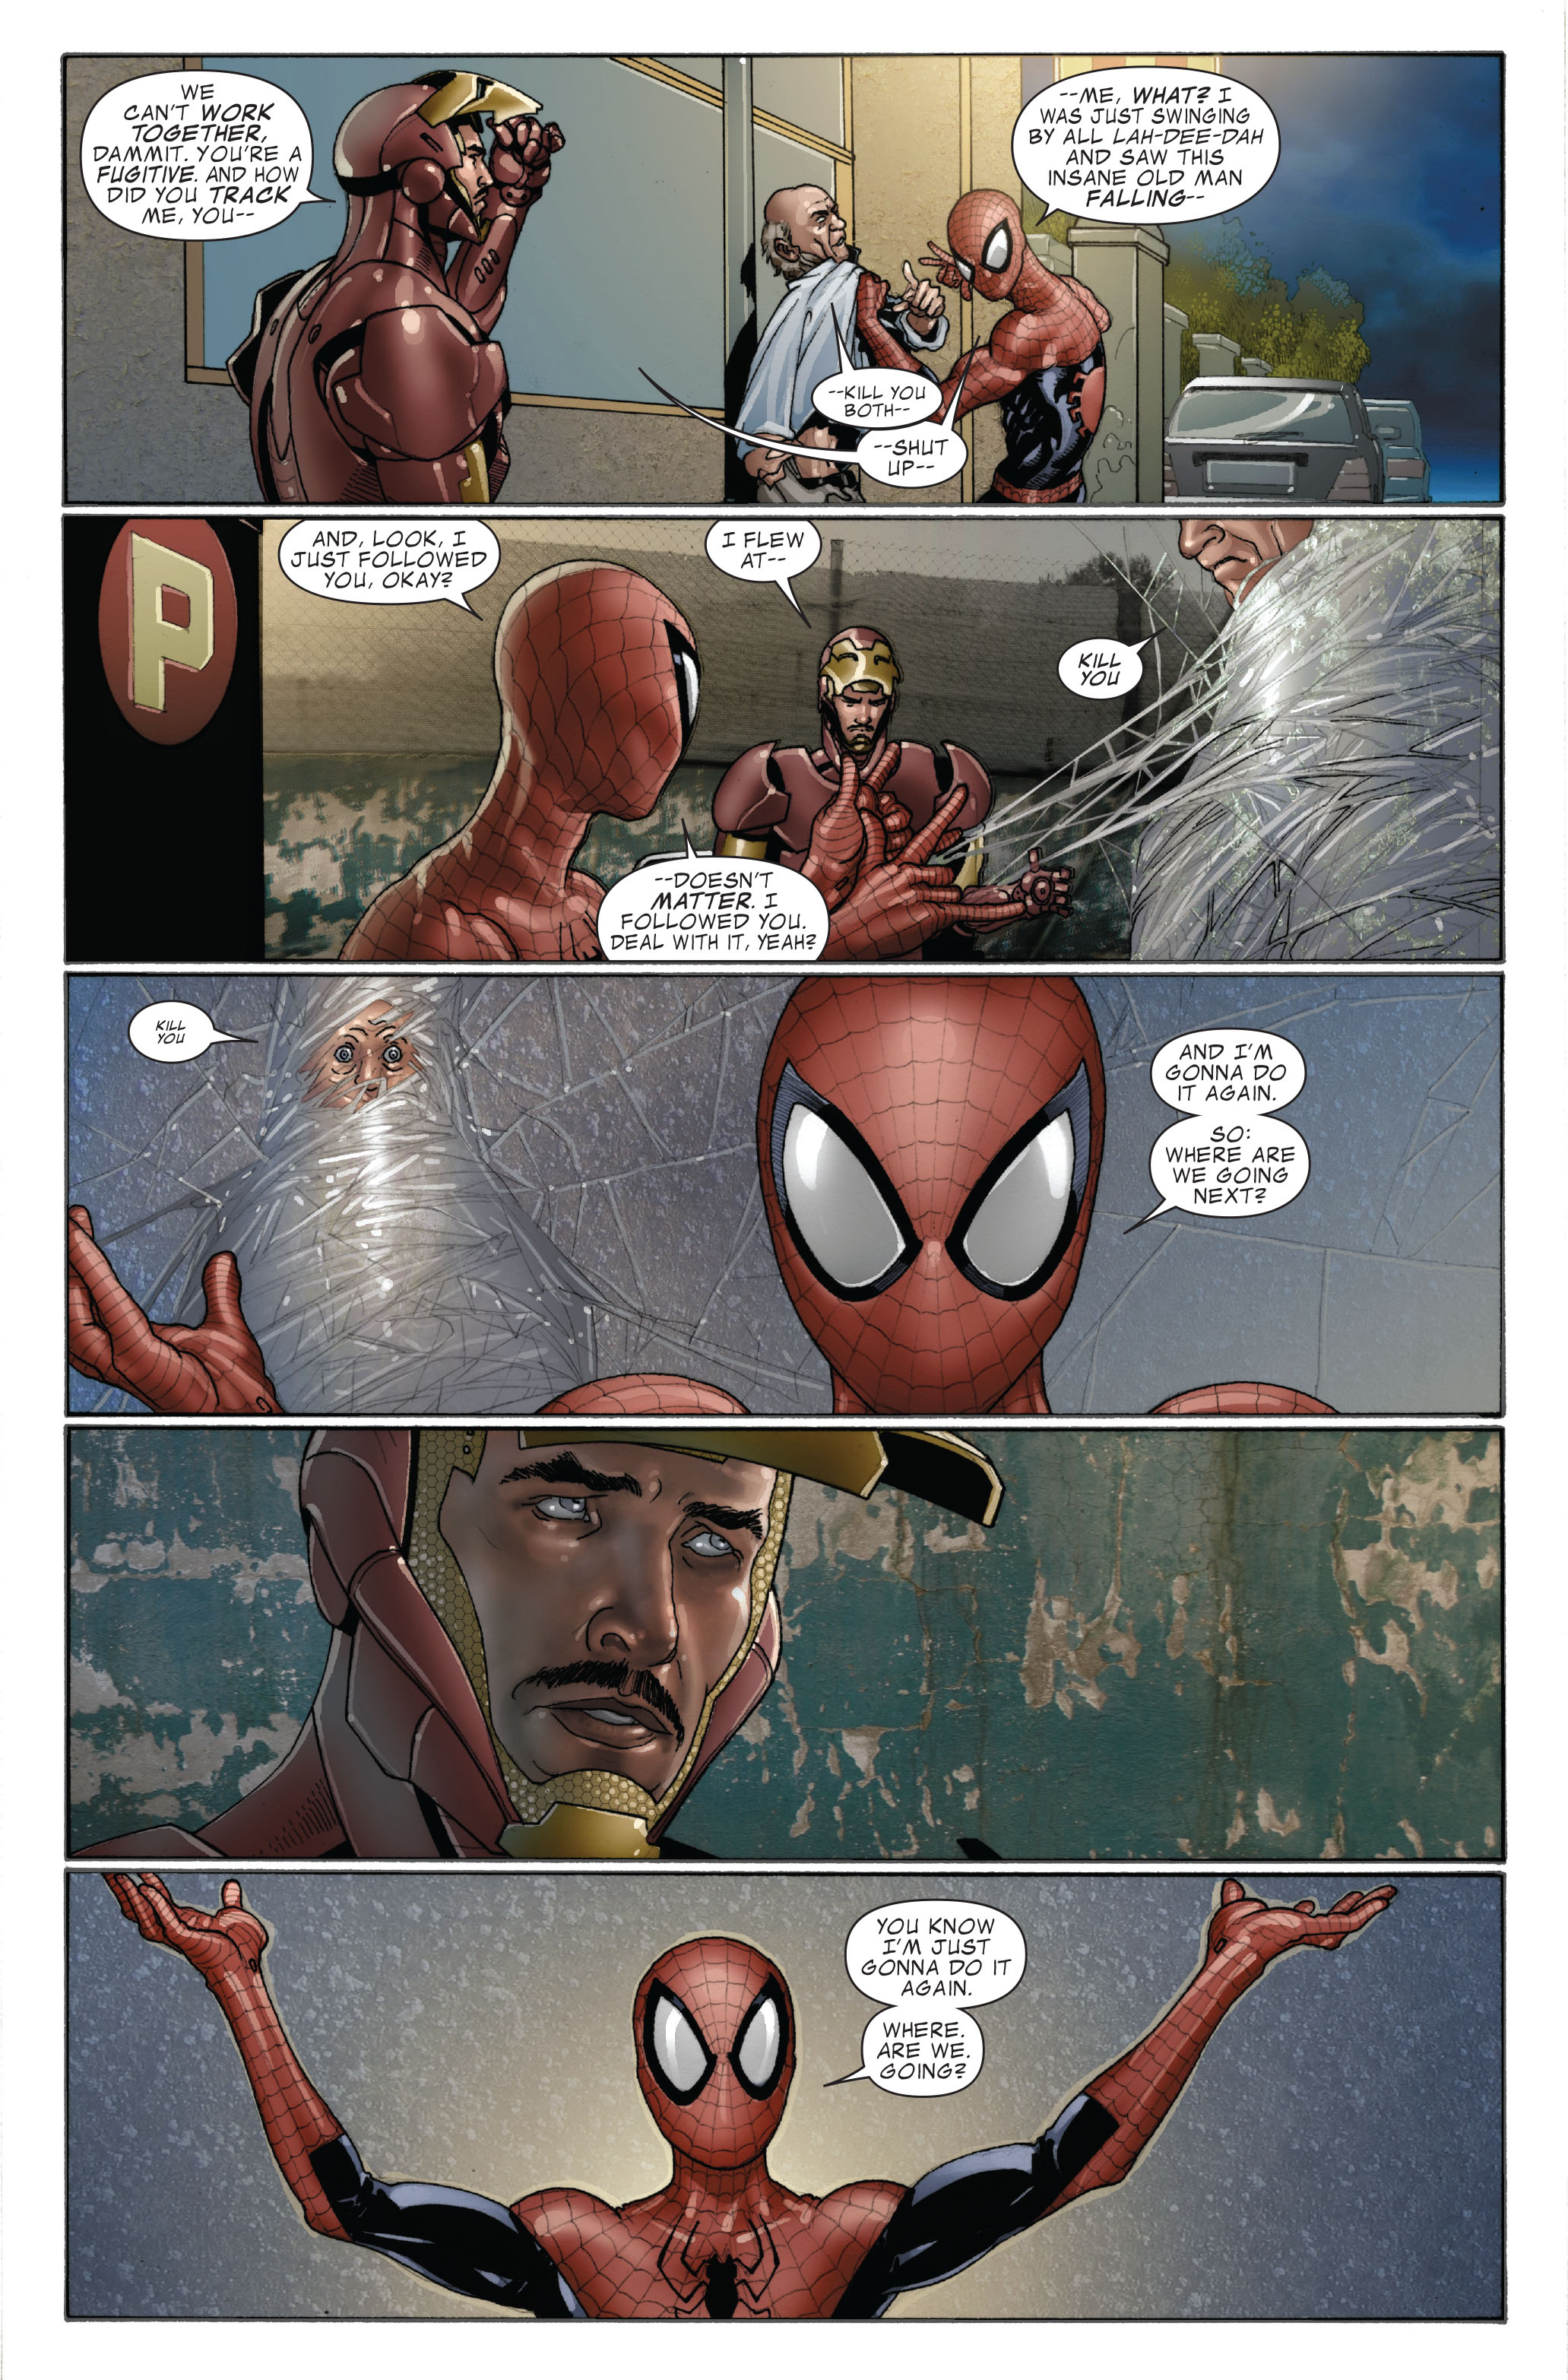 Invincible Iron Man (2008) 7 Page 13